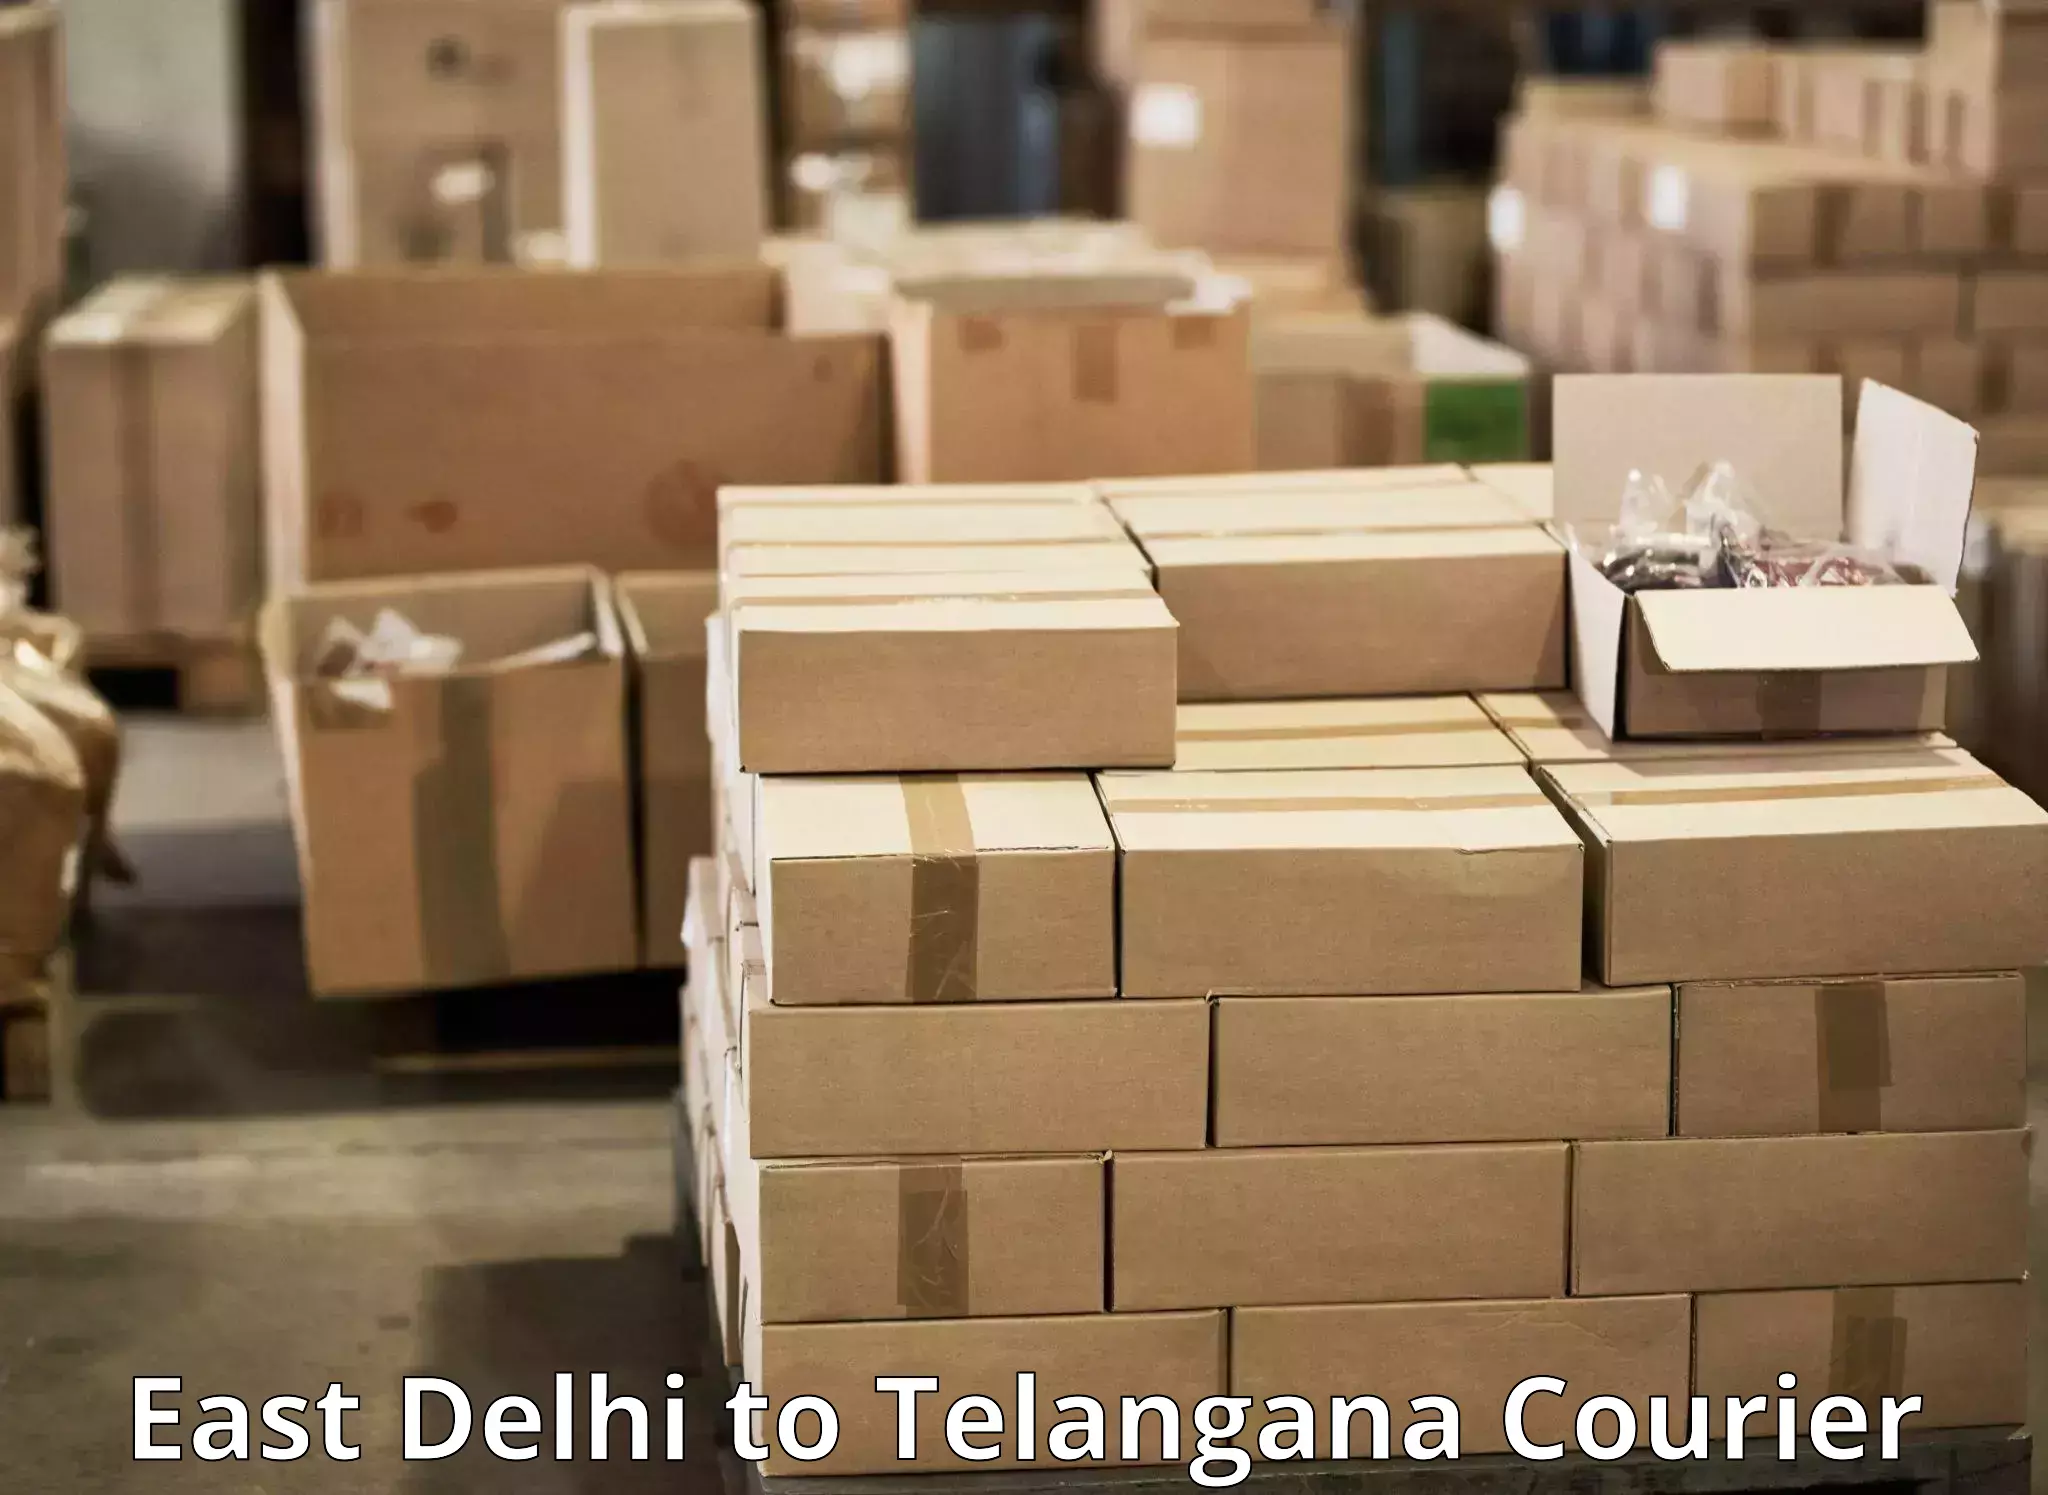 High-efficiency logistics in East Delhi to Secunderabad